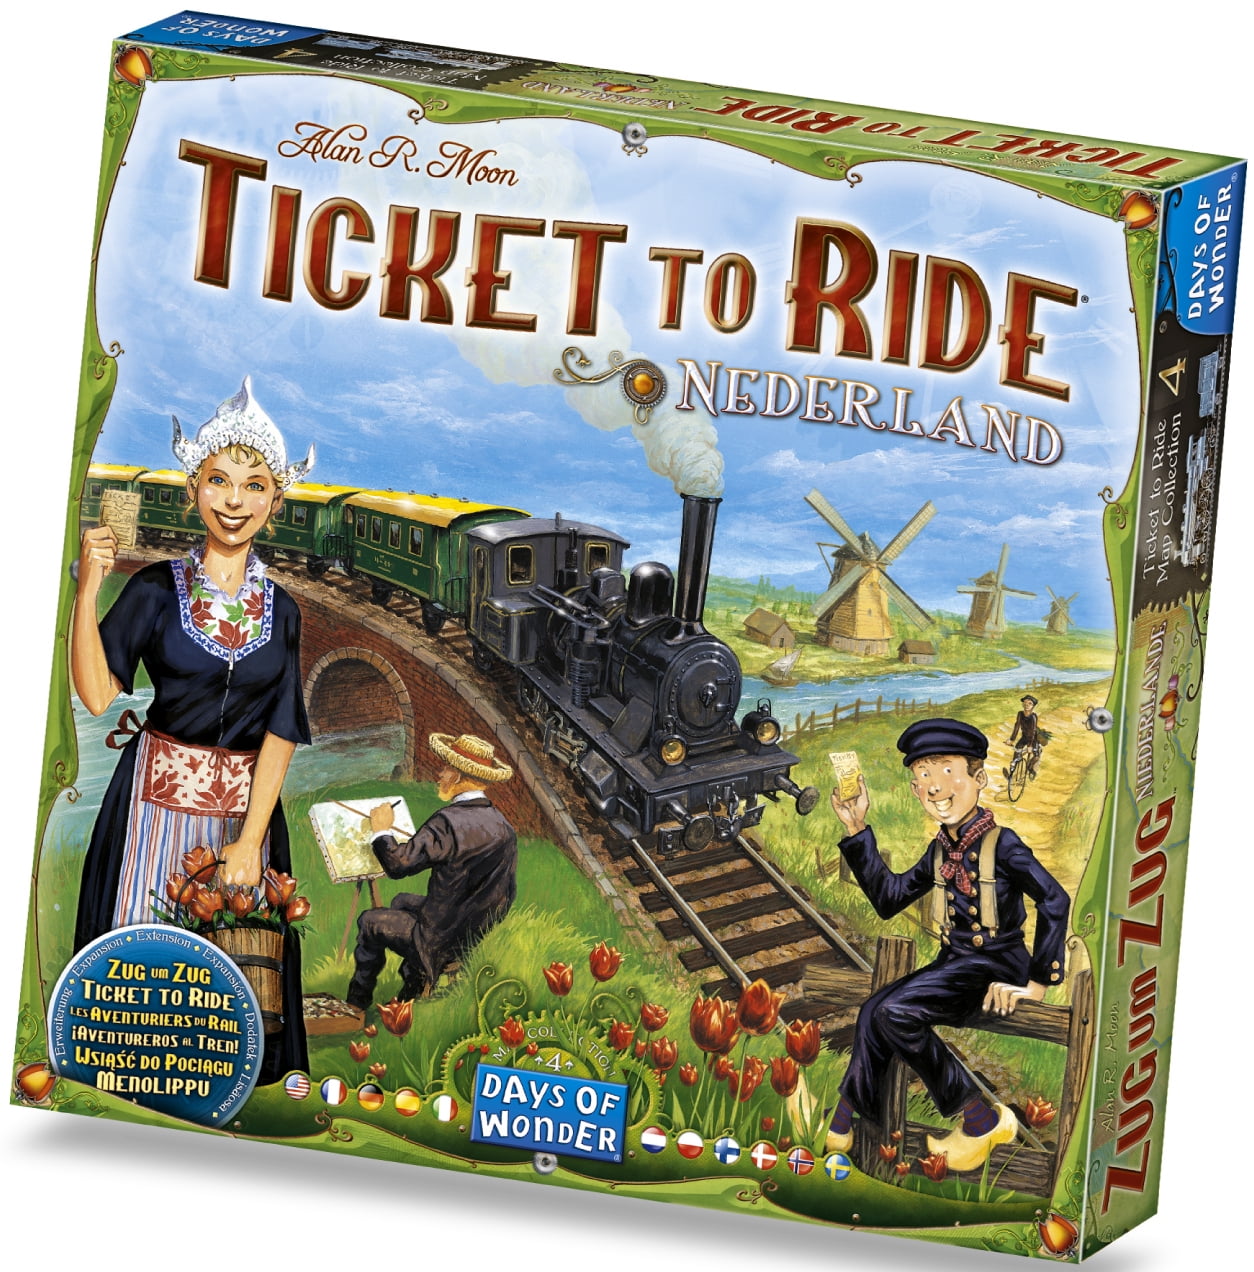  Ticket to Ride Board Game, Family Board Game, Board Game for  Adults and Family, Train Game, Ages 8+, For 2 to 5 players